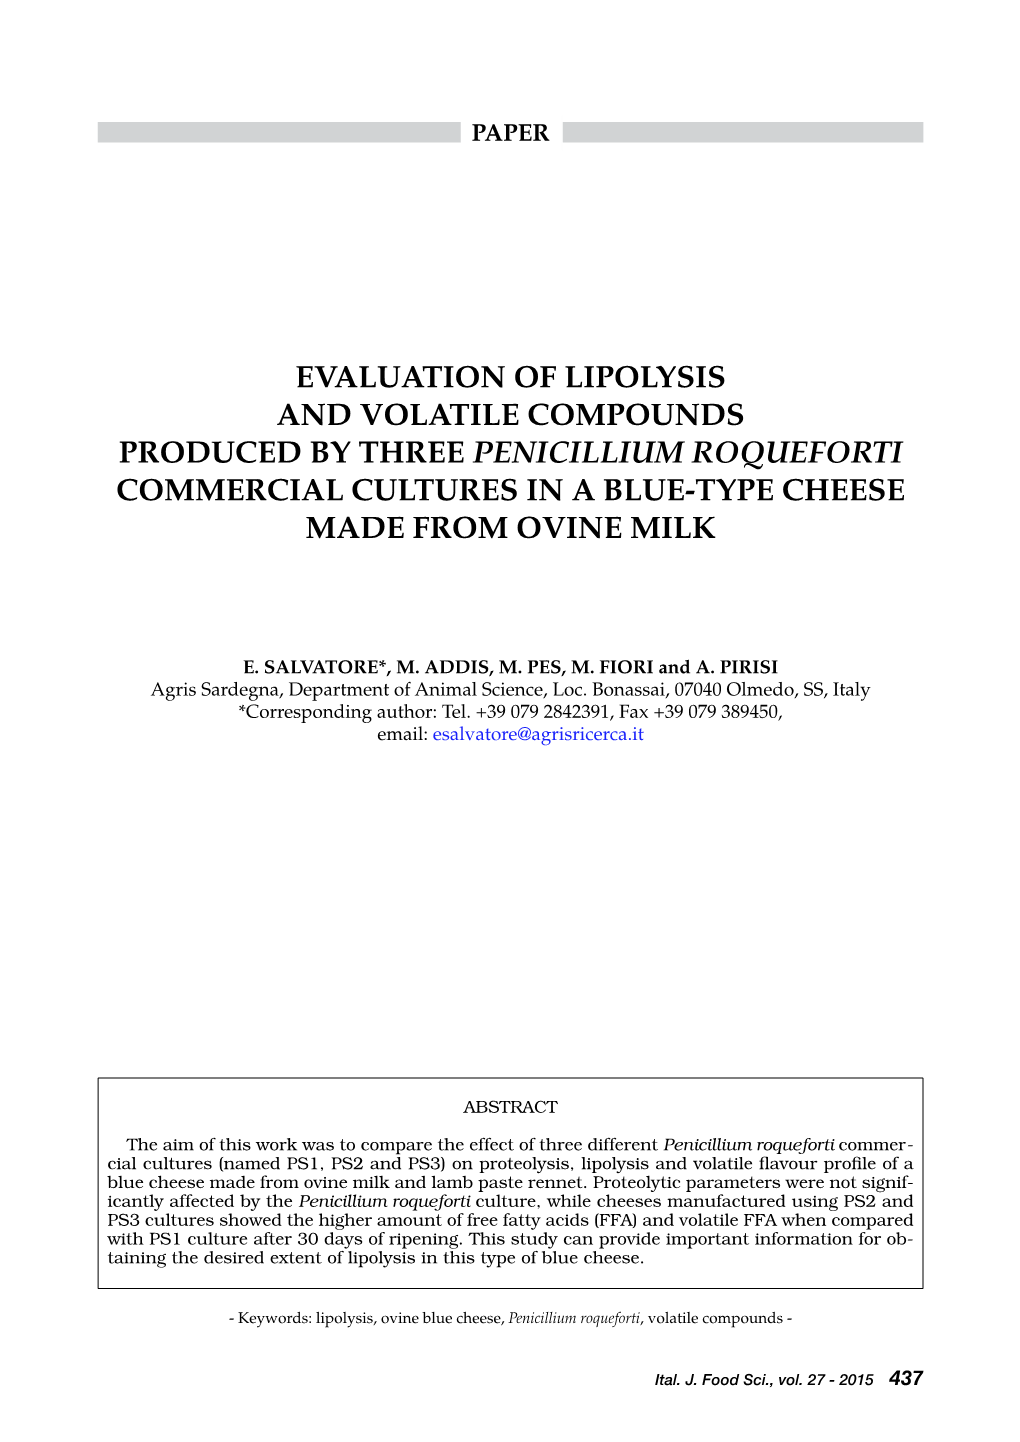 Evaluation of Lipolysis and Volatile Compounds Produced by Three Penicillium Roqueforti Commercial Cultures in a Blue-Type Cheese Made from Ovine Milk